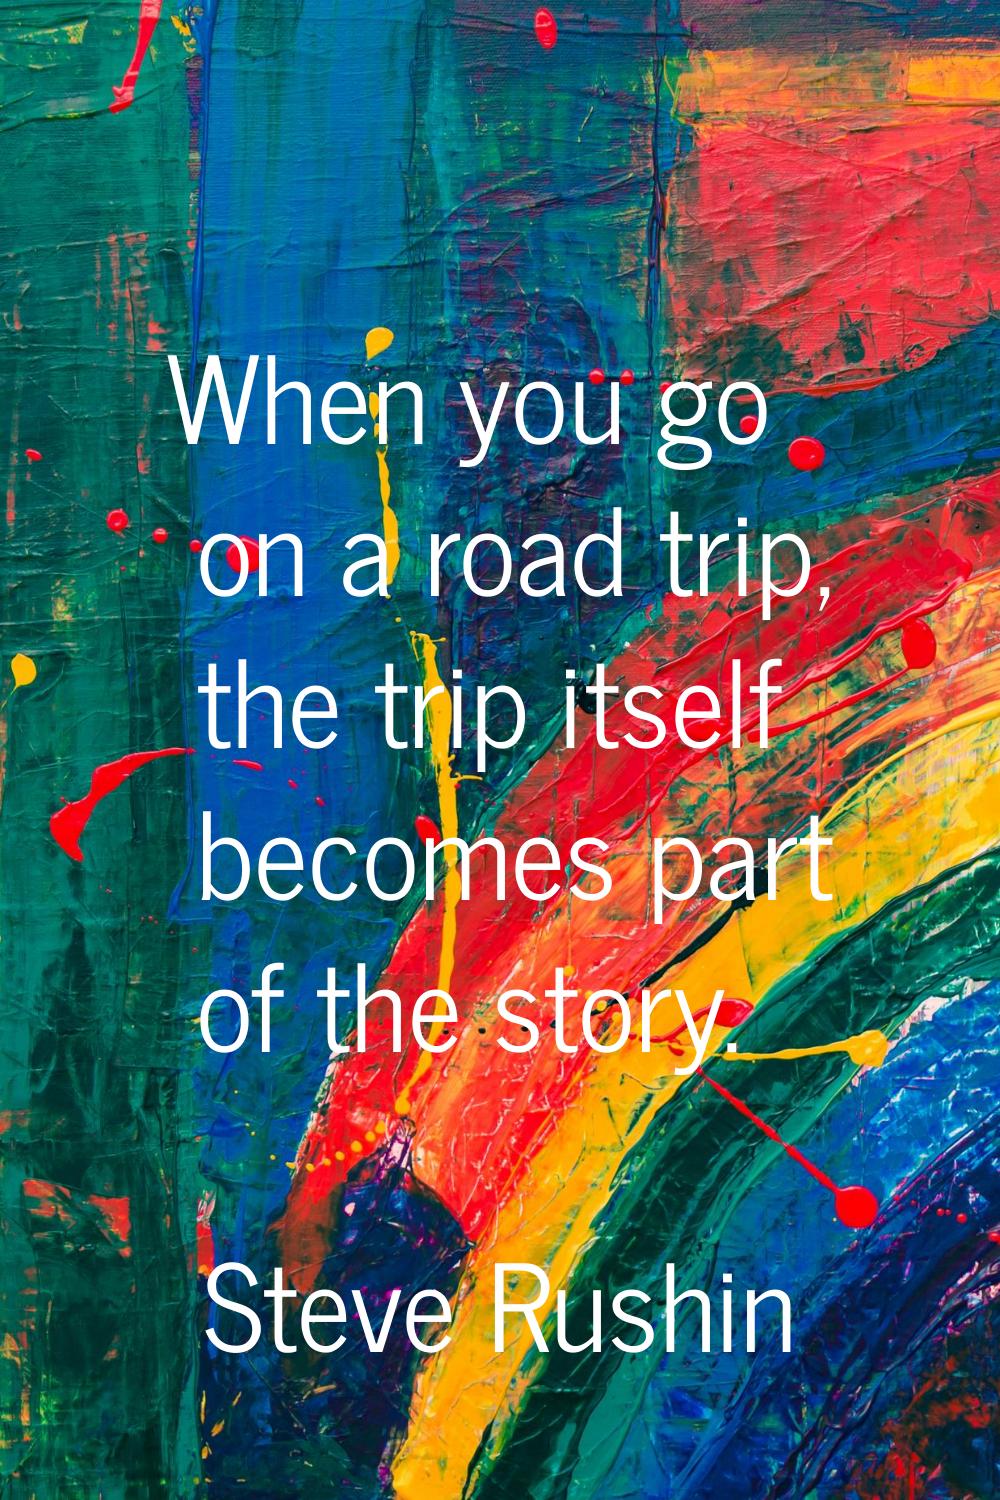 When you go on a road trip, the trip itself becomes part of the story.